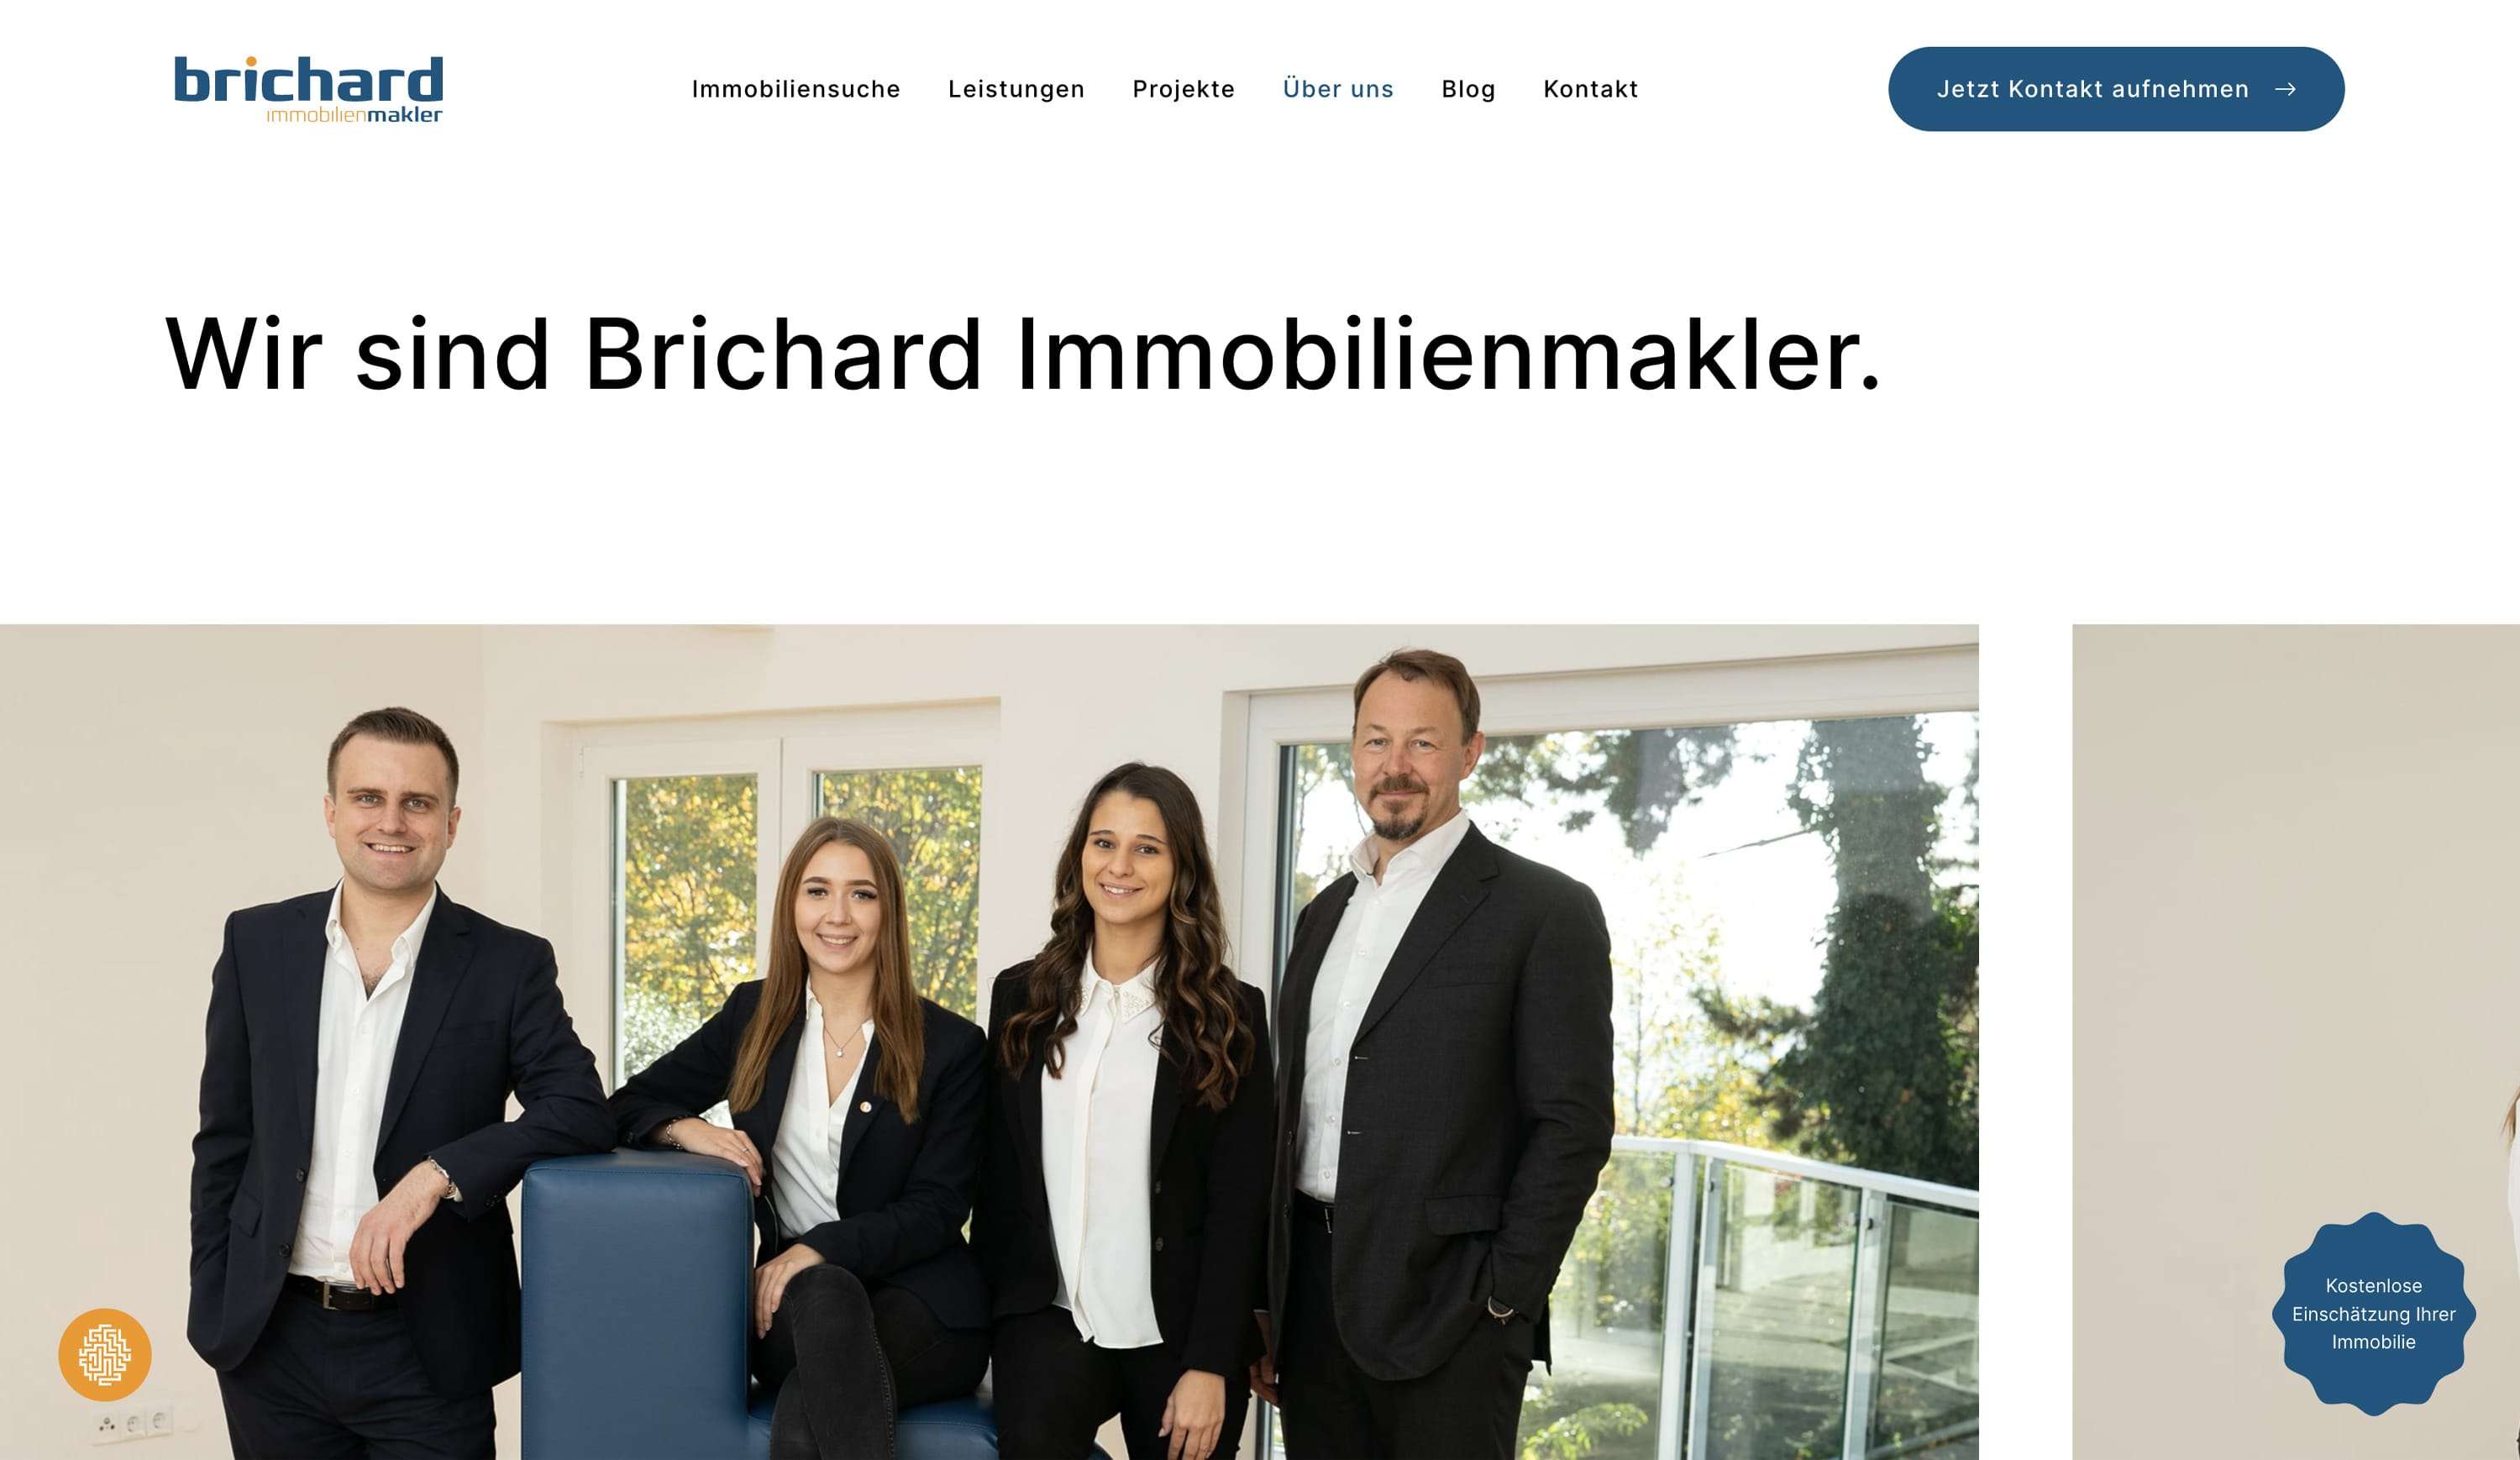 Take the real estate broker's image to the next level with Brichard.